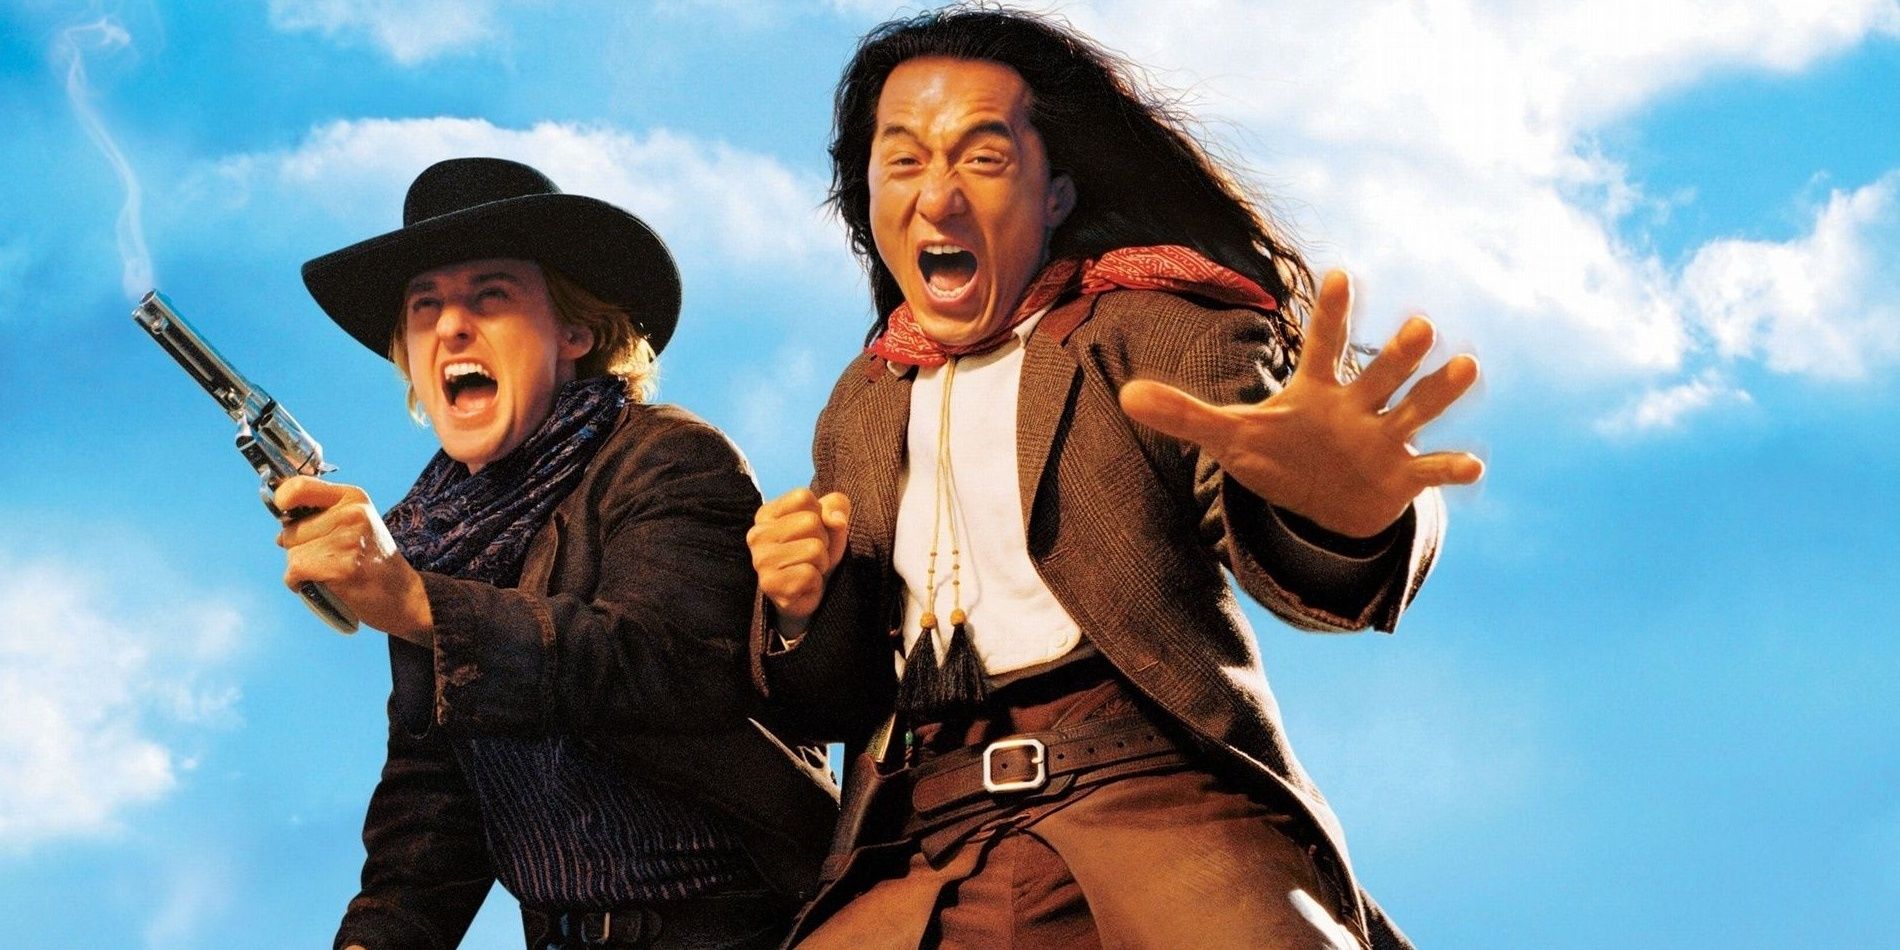 Jackie Chan and Owen Wilson on the poster for Shanghai Noon